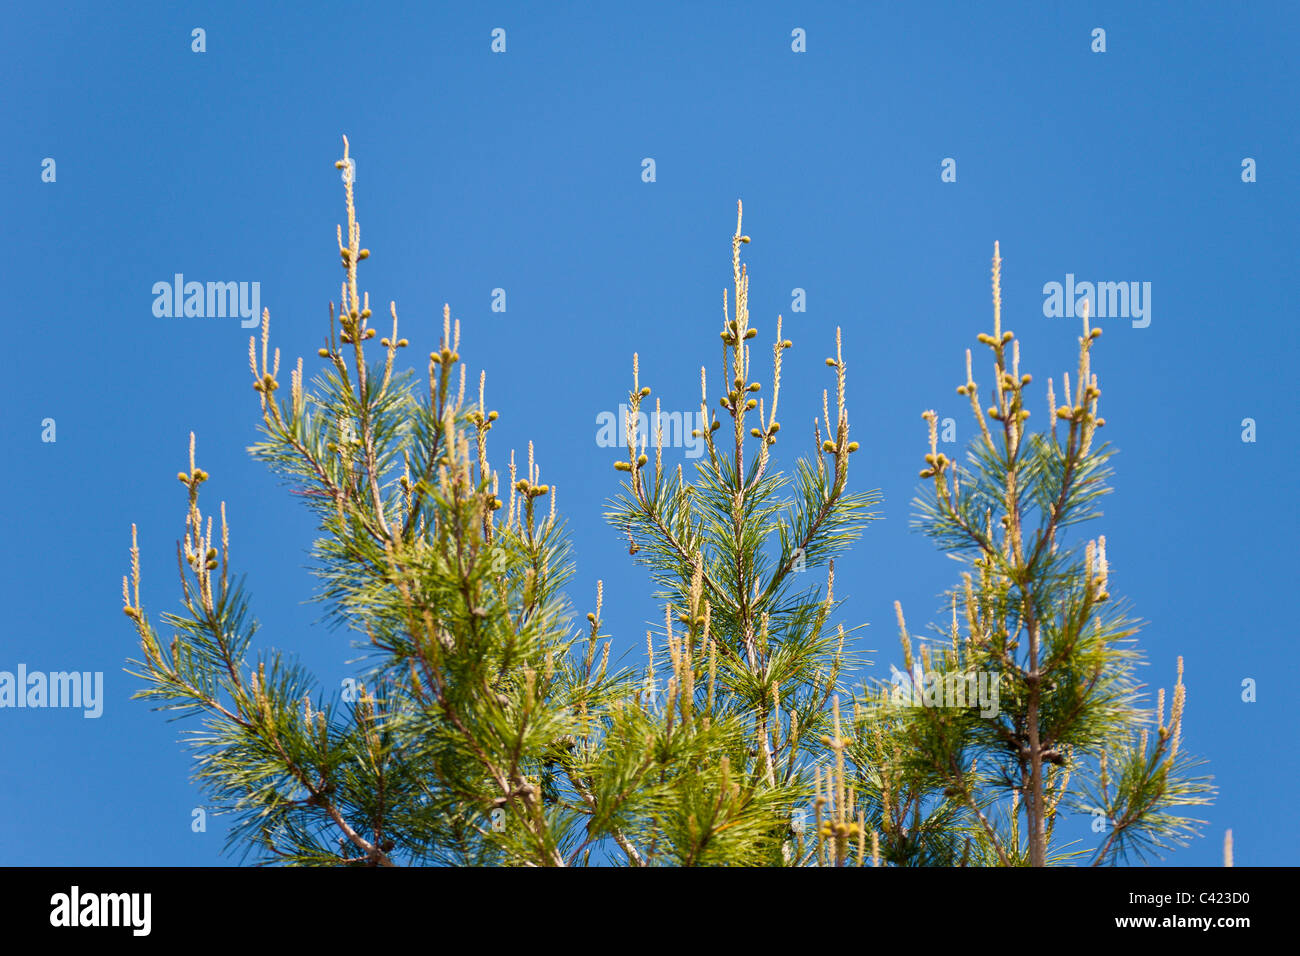 New growth candles with new branches growing from them seen from a distance resemble crosses. Stock Photo